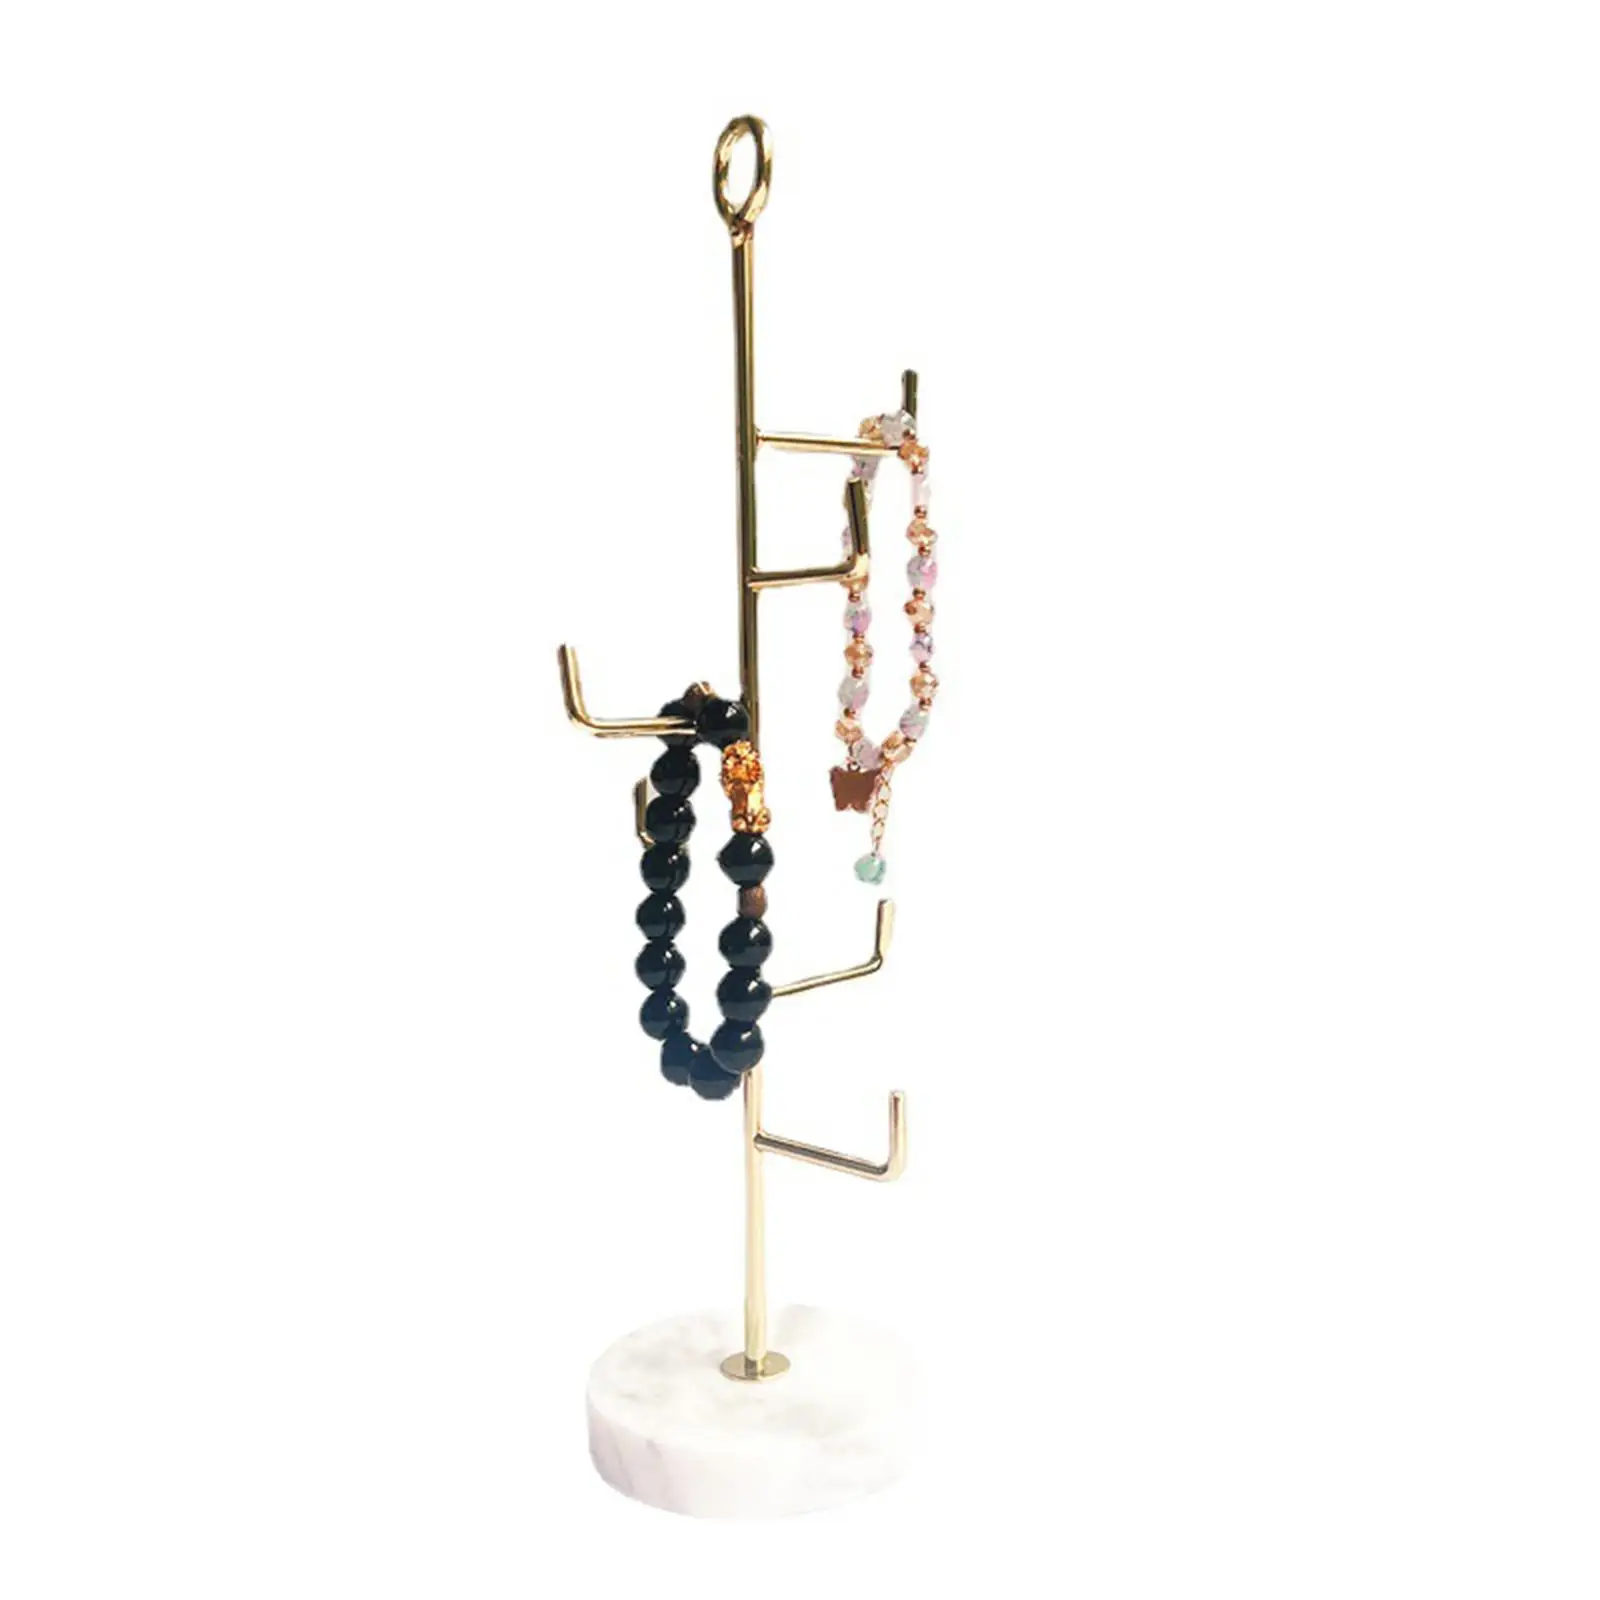 6 Tier Jewelry Stand Hanger Bracelets Necklaces and Earrings Holder White Marble Base Stable Base Organizer Simple and Elegant